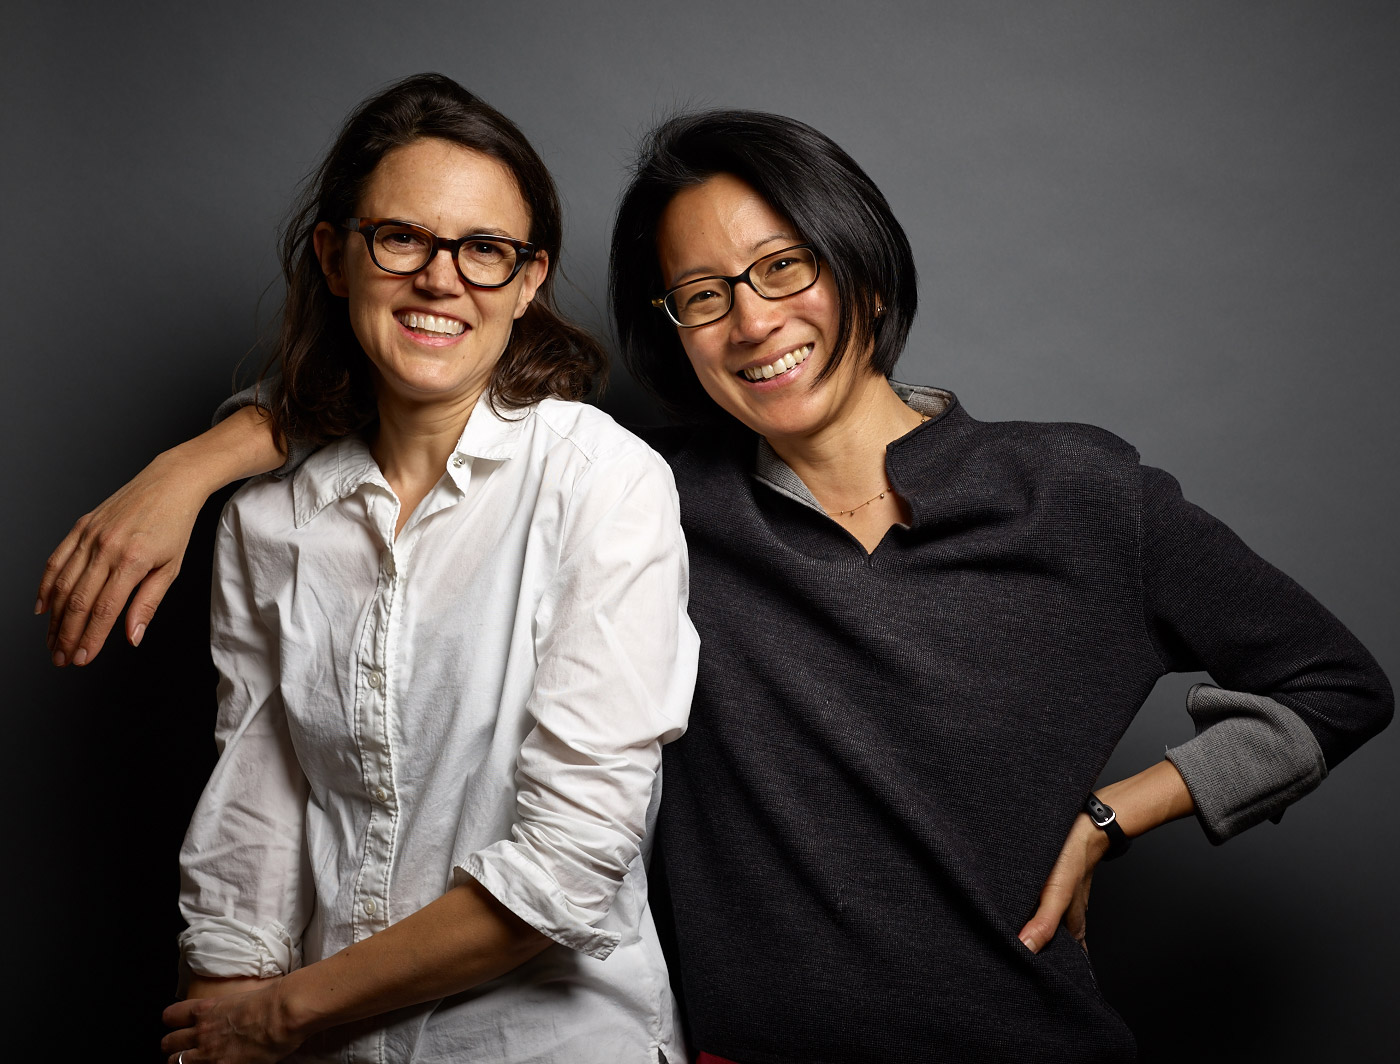 Sarah Gephart and Alicia Cheng of MGMT Design photographed by Harry Zernike